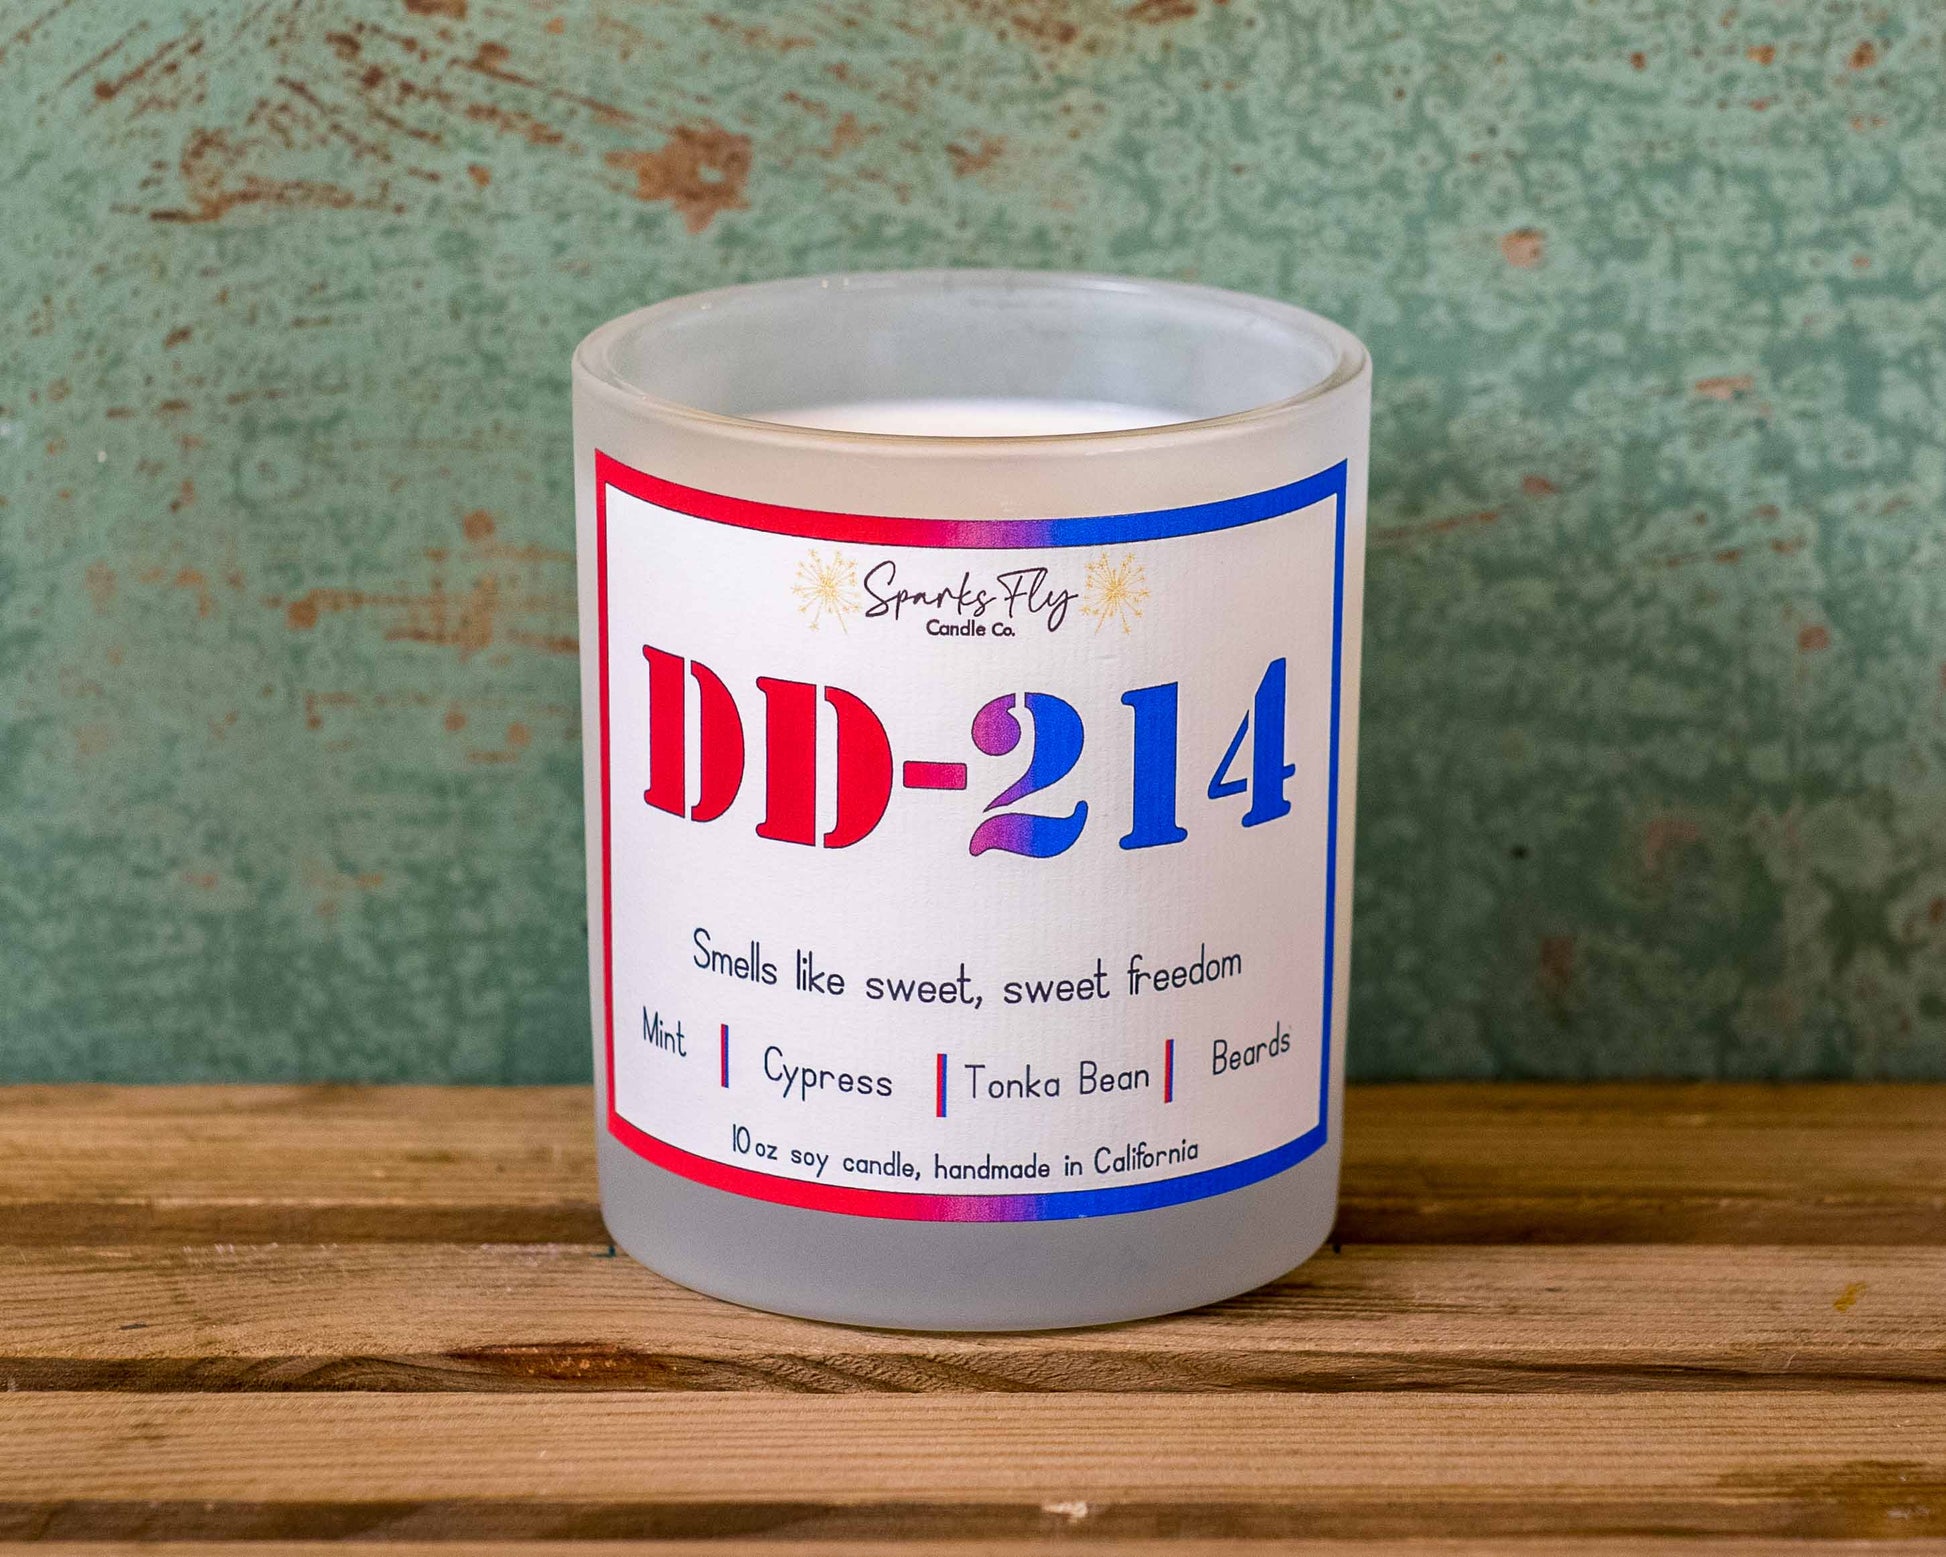 DD214 Candle; Celebrating the essence of a veteran's cherished freedom